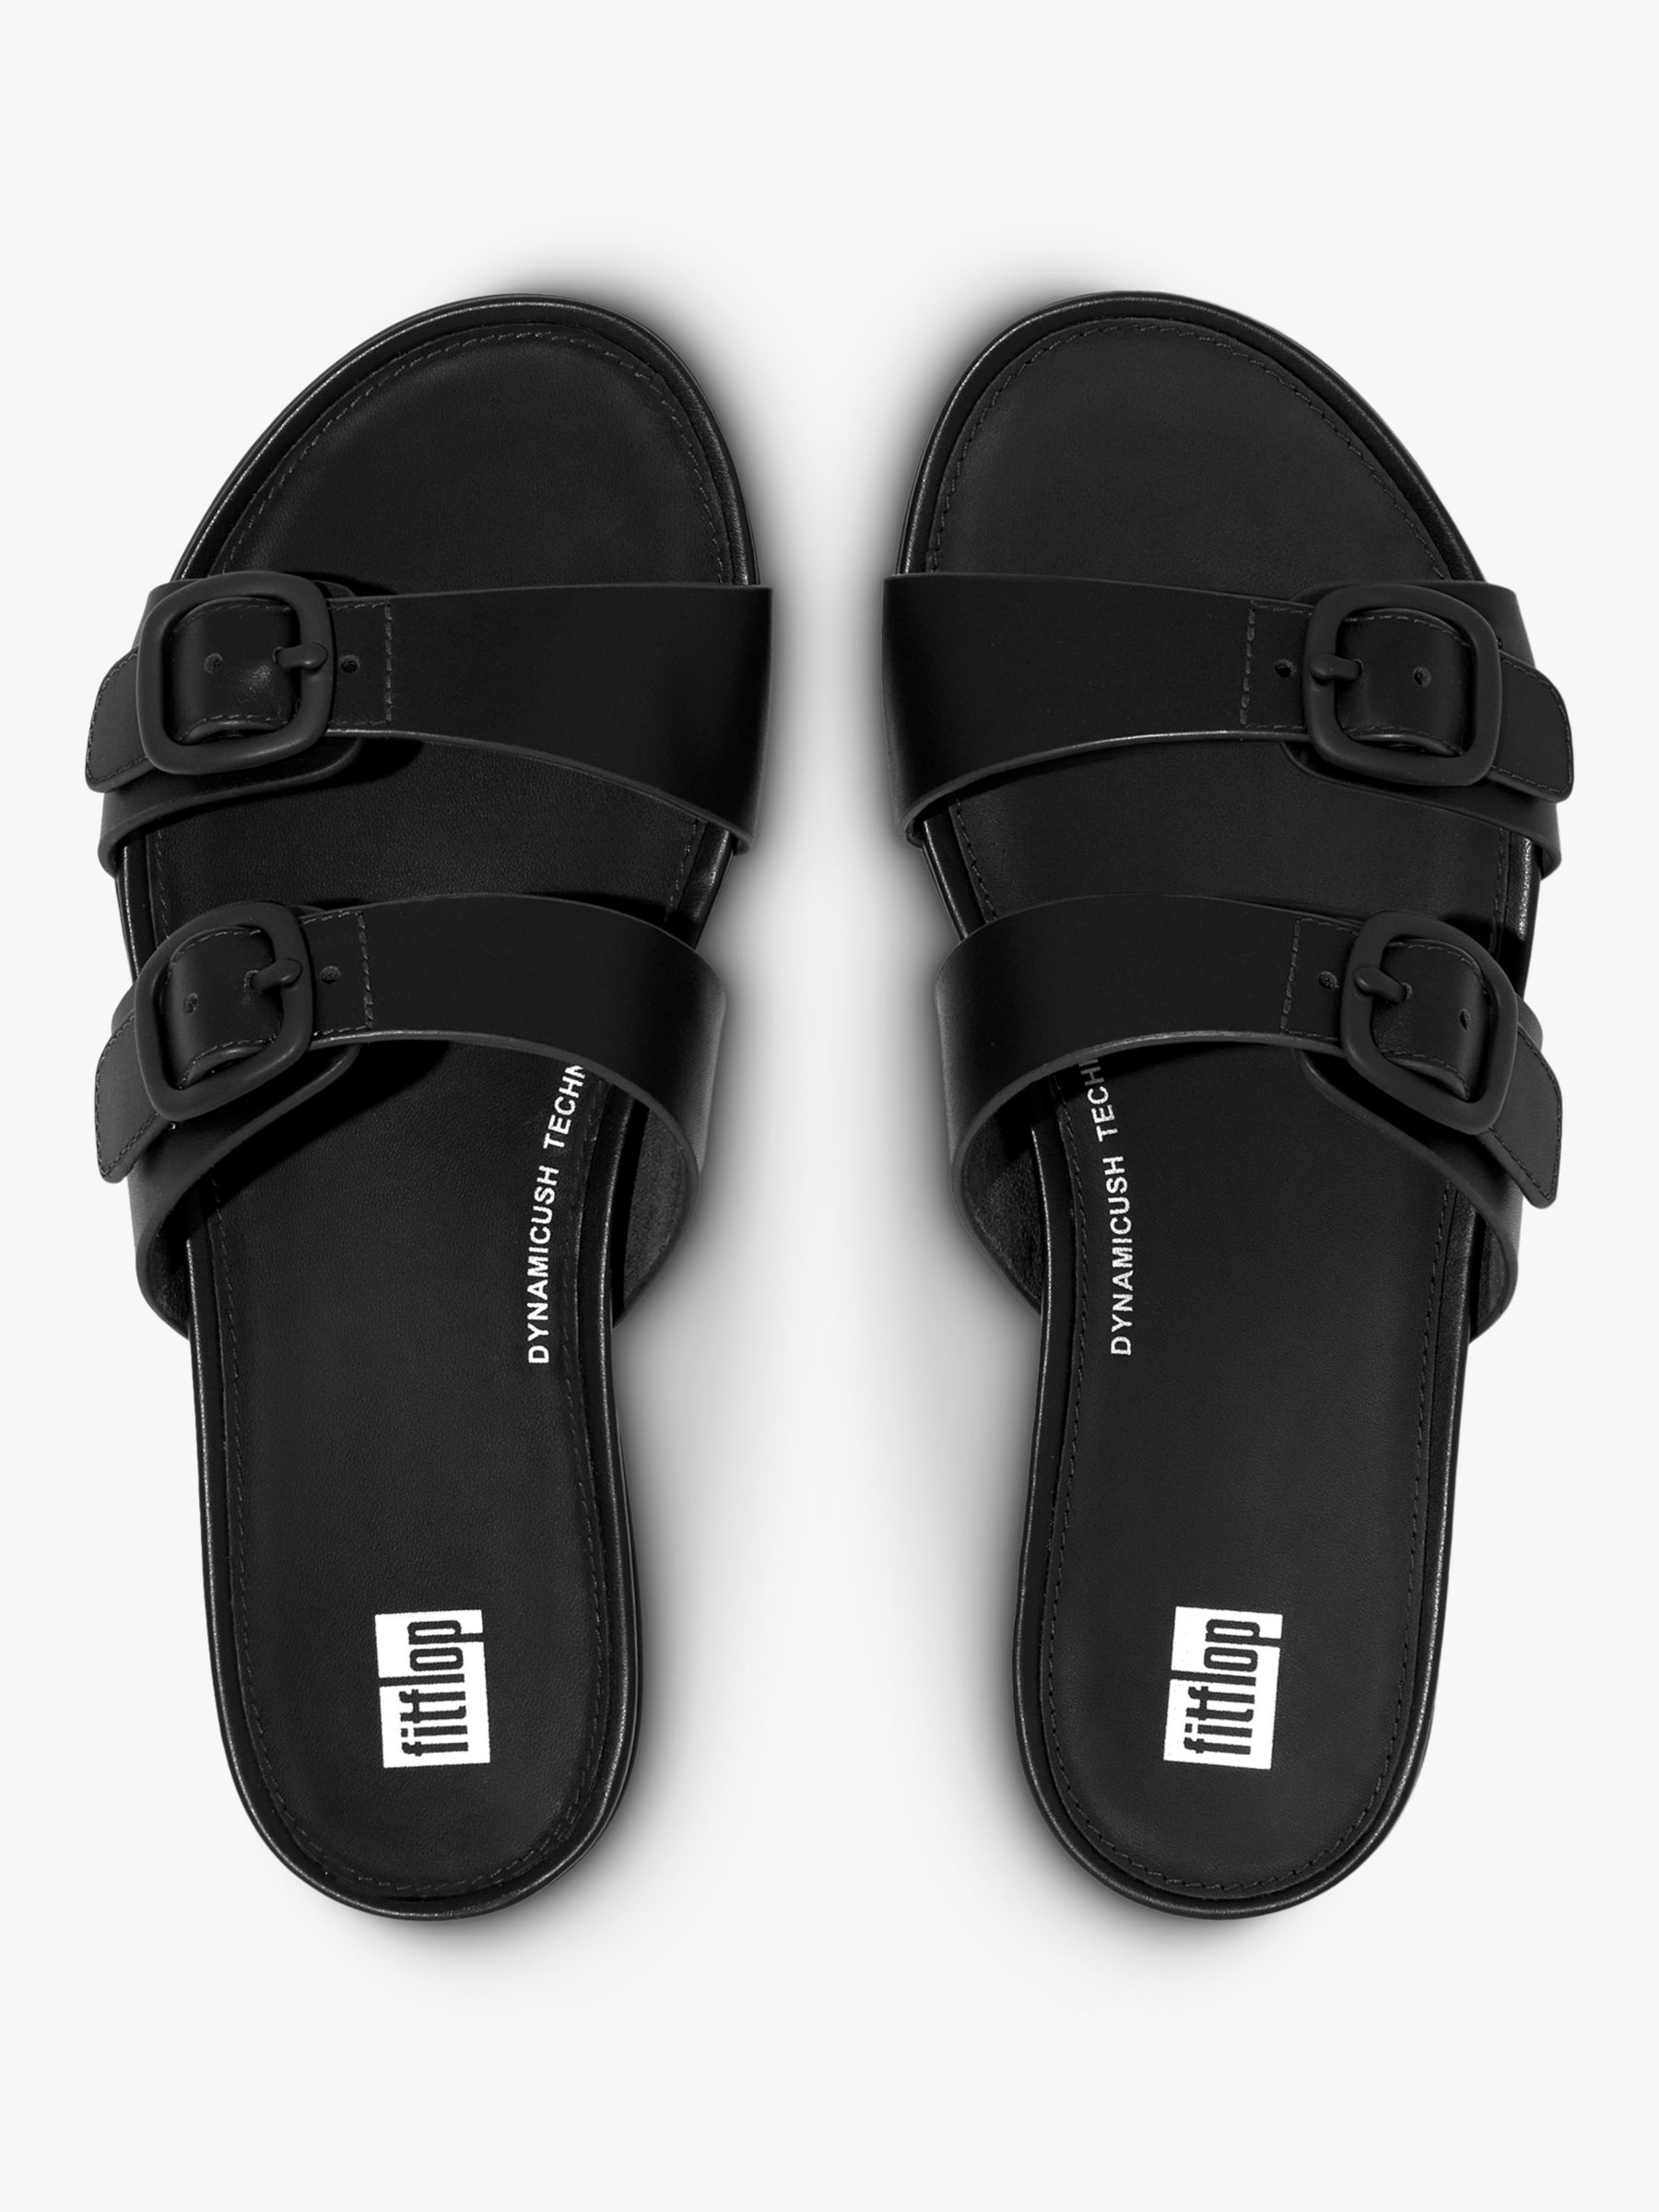 FitFlop Gracie Leather Two Strap Slider Sandals, All Black at John ...